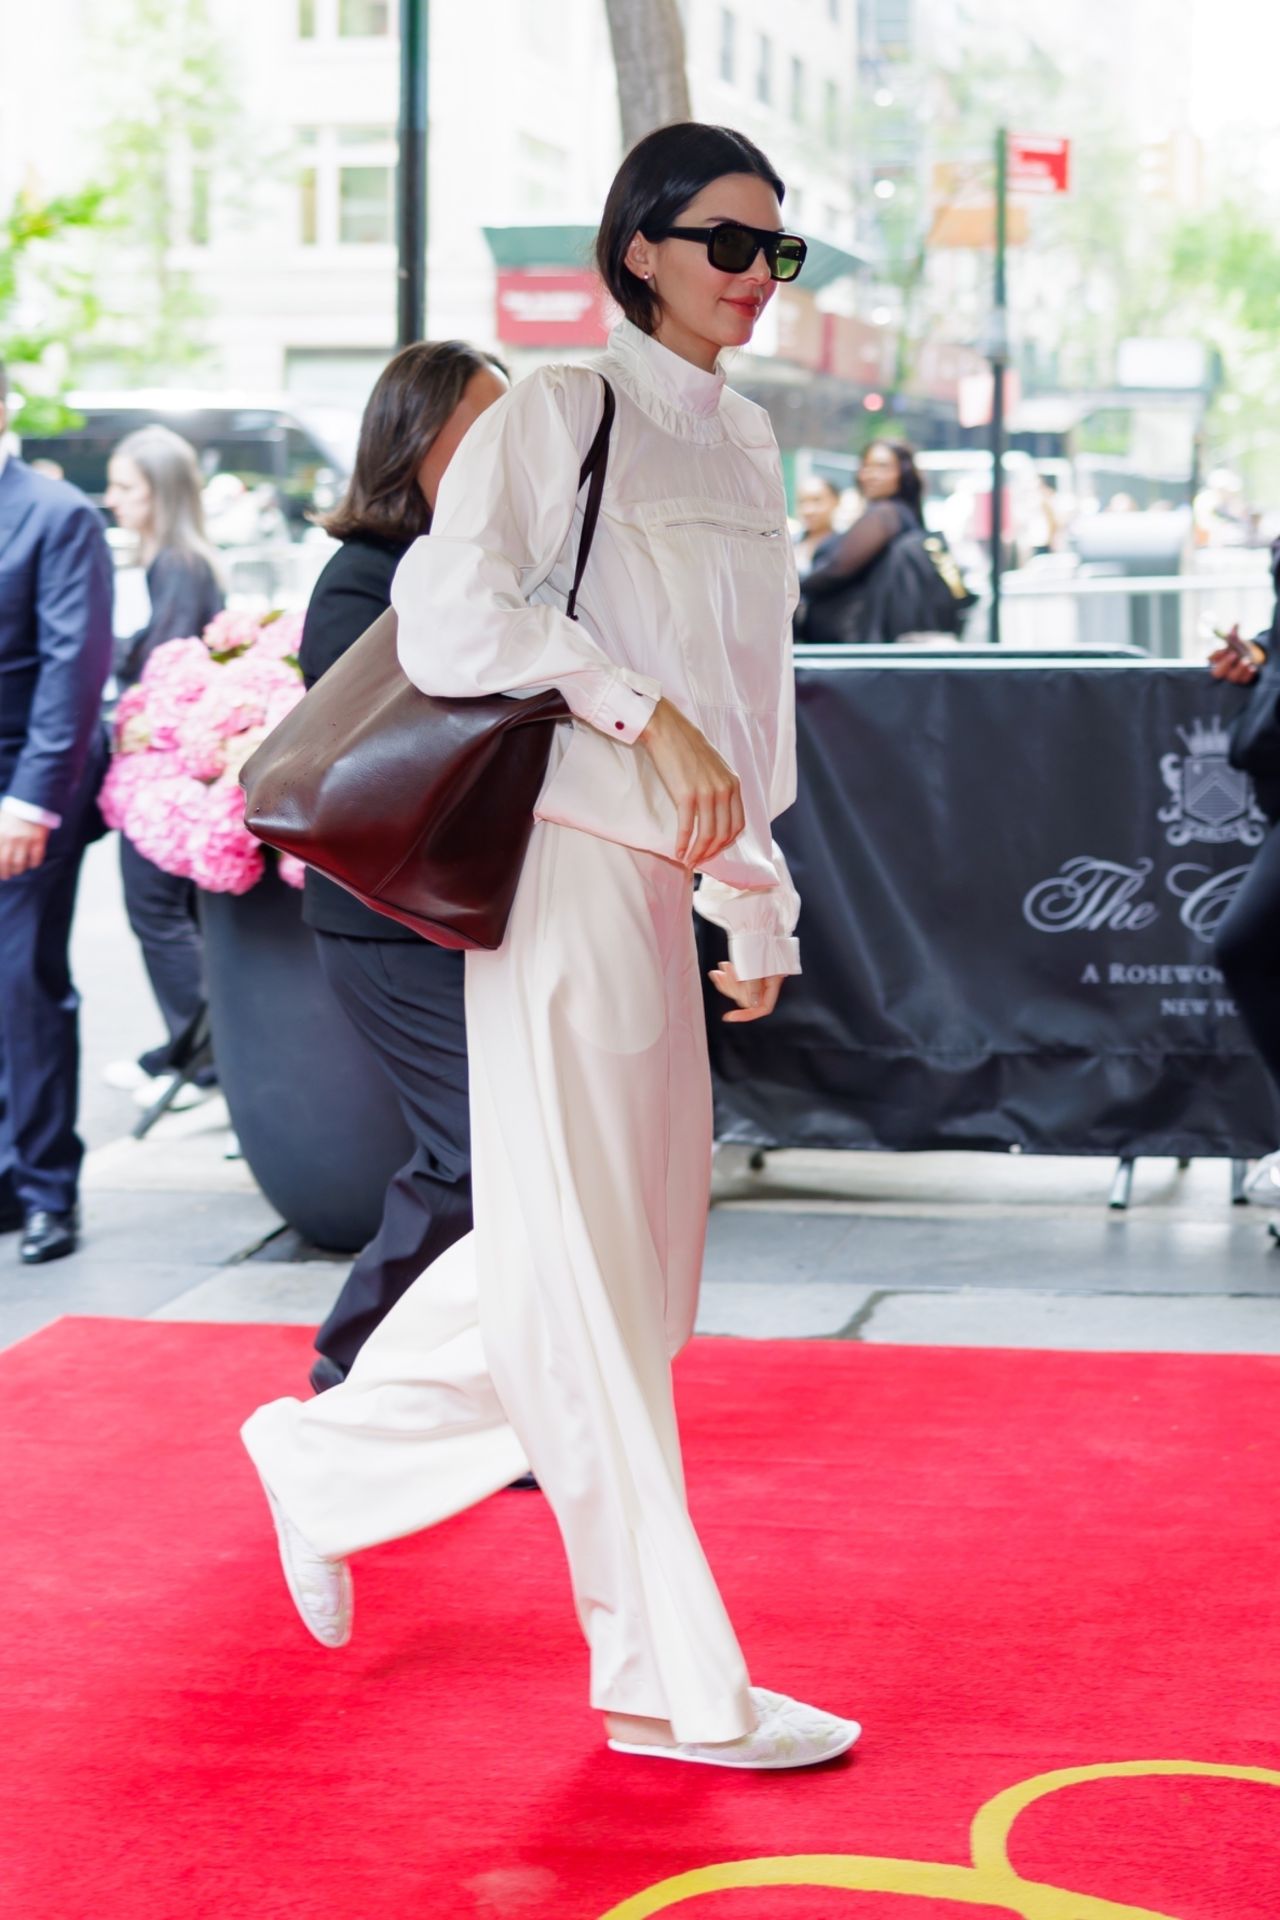 KENDALL JENNER ARRIVING AT CARLYLE HOTEL IN NEW YORK3